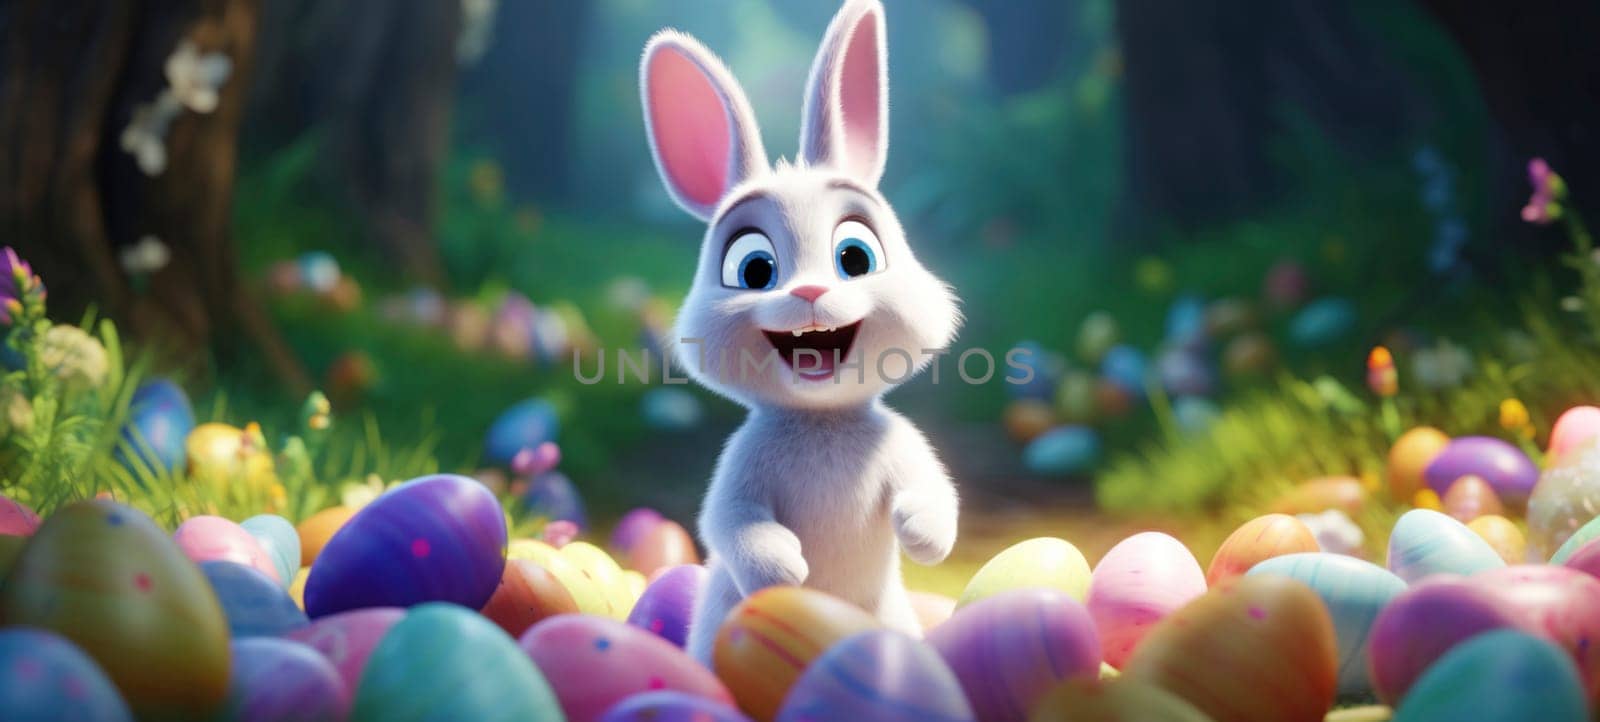 Happy Easter colorful banner with cute cartoon bunny rabbit and a lots of eggs. Easter festival background with bunny and eggs. Egg hunt contest